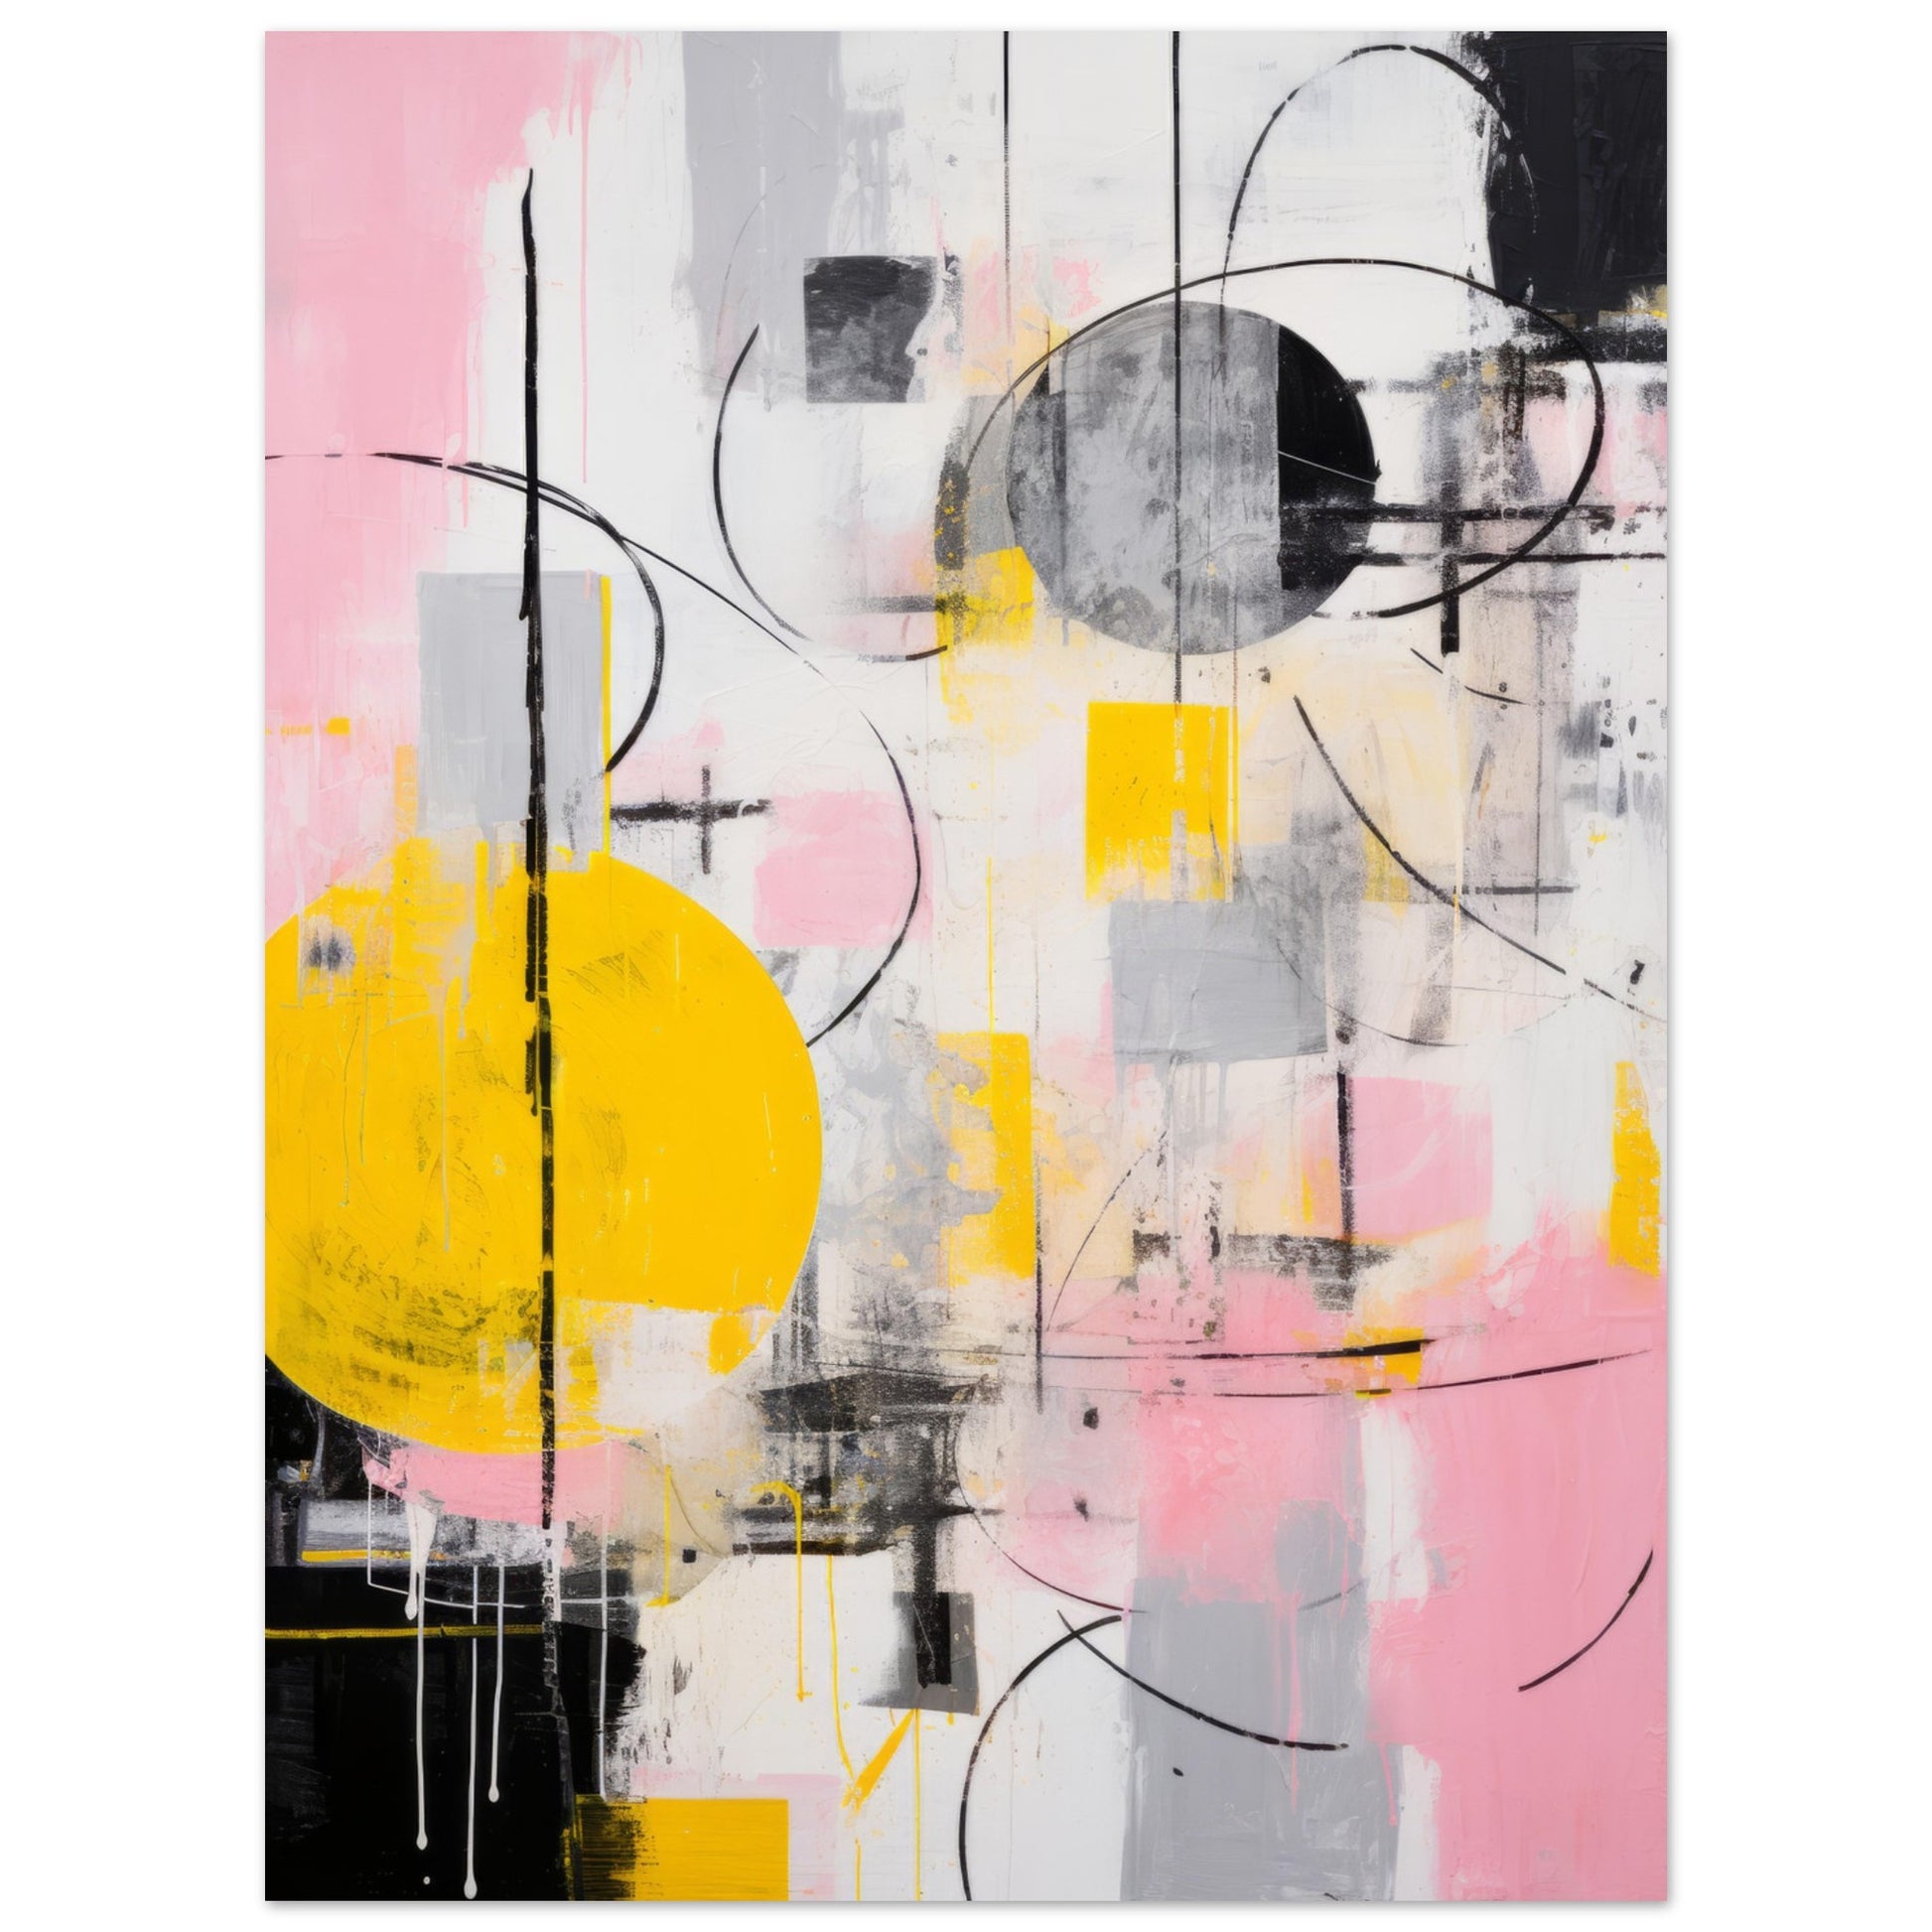 A modern abstract wall art titled "Multitudes" with a blend of vibrant yellow, soft pink, and muted gray shades. The artwork showcases geometrical and free-form elements, representing the diverse emotions and experiences of life.